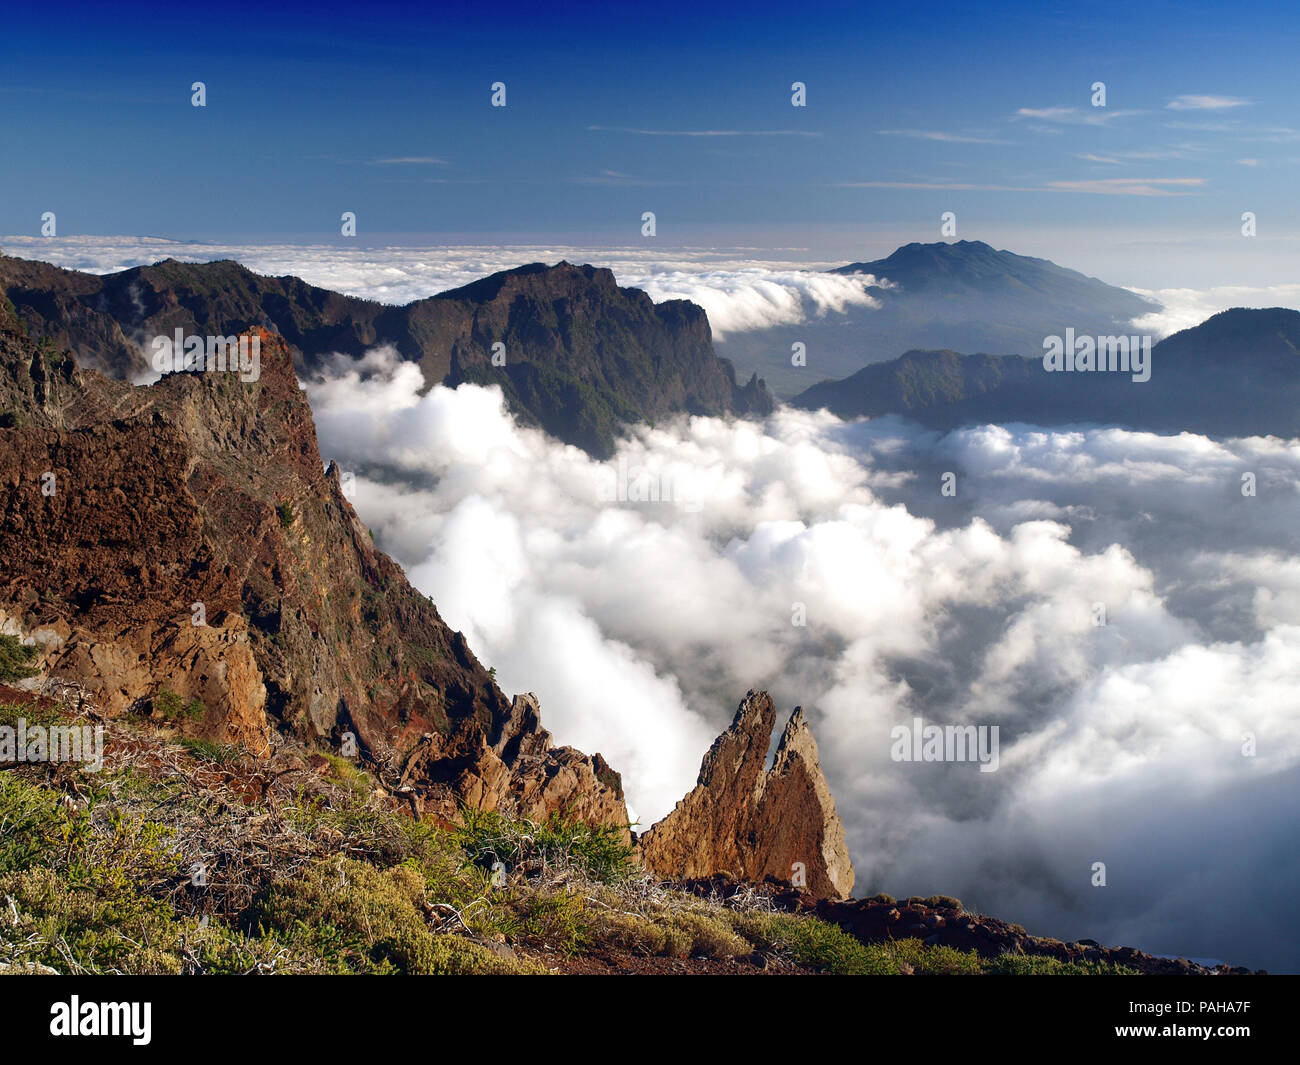 Mists clinging to the sides of the Caldera de Taburiente  on the Canary Island of La Palma Stock Photo